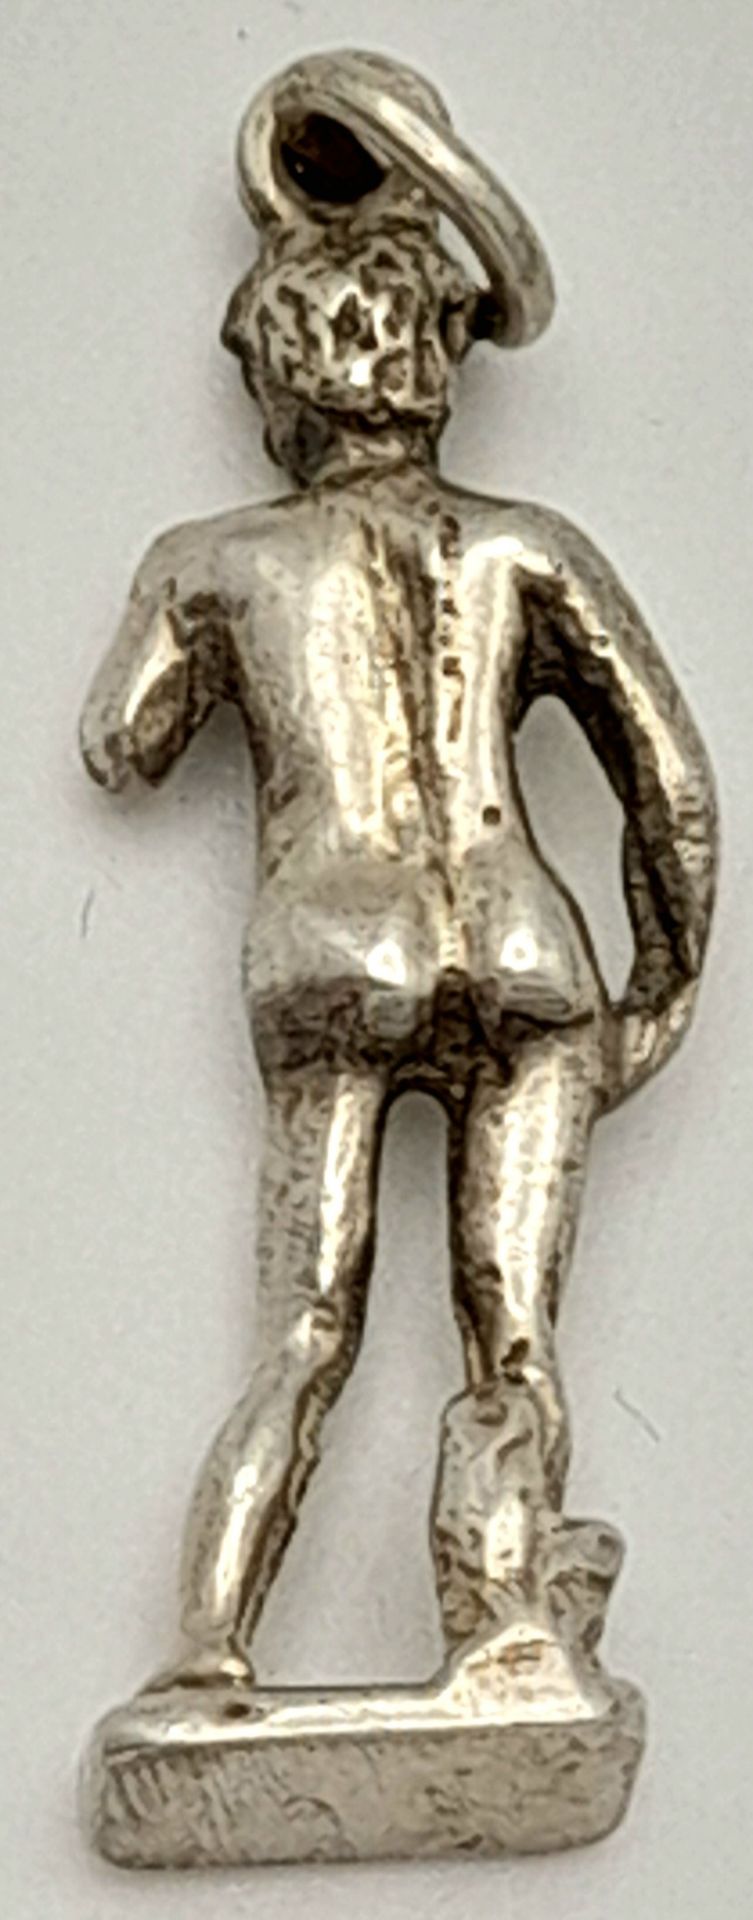 A STERLING SILVER MICHELANGELO'S DAVID STATUE CHARM. 3.5cm length, 3.6g weight. Ref: SC 8125 - Image 4 of 4